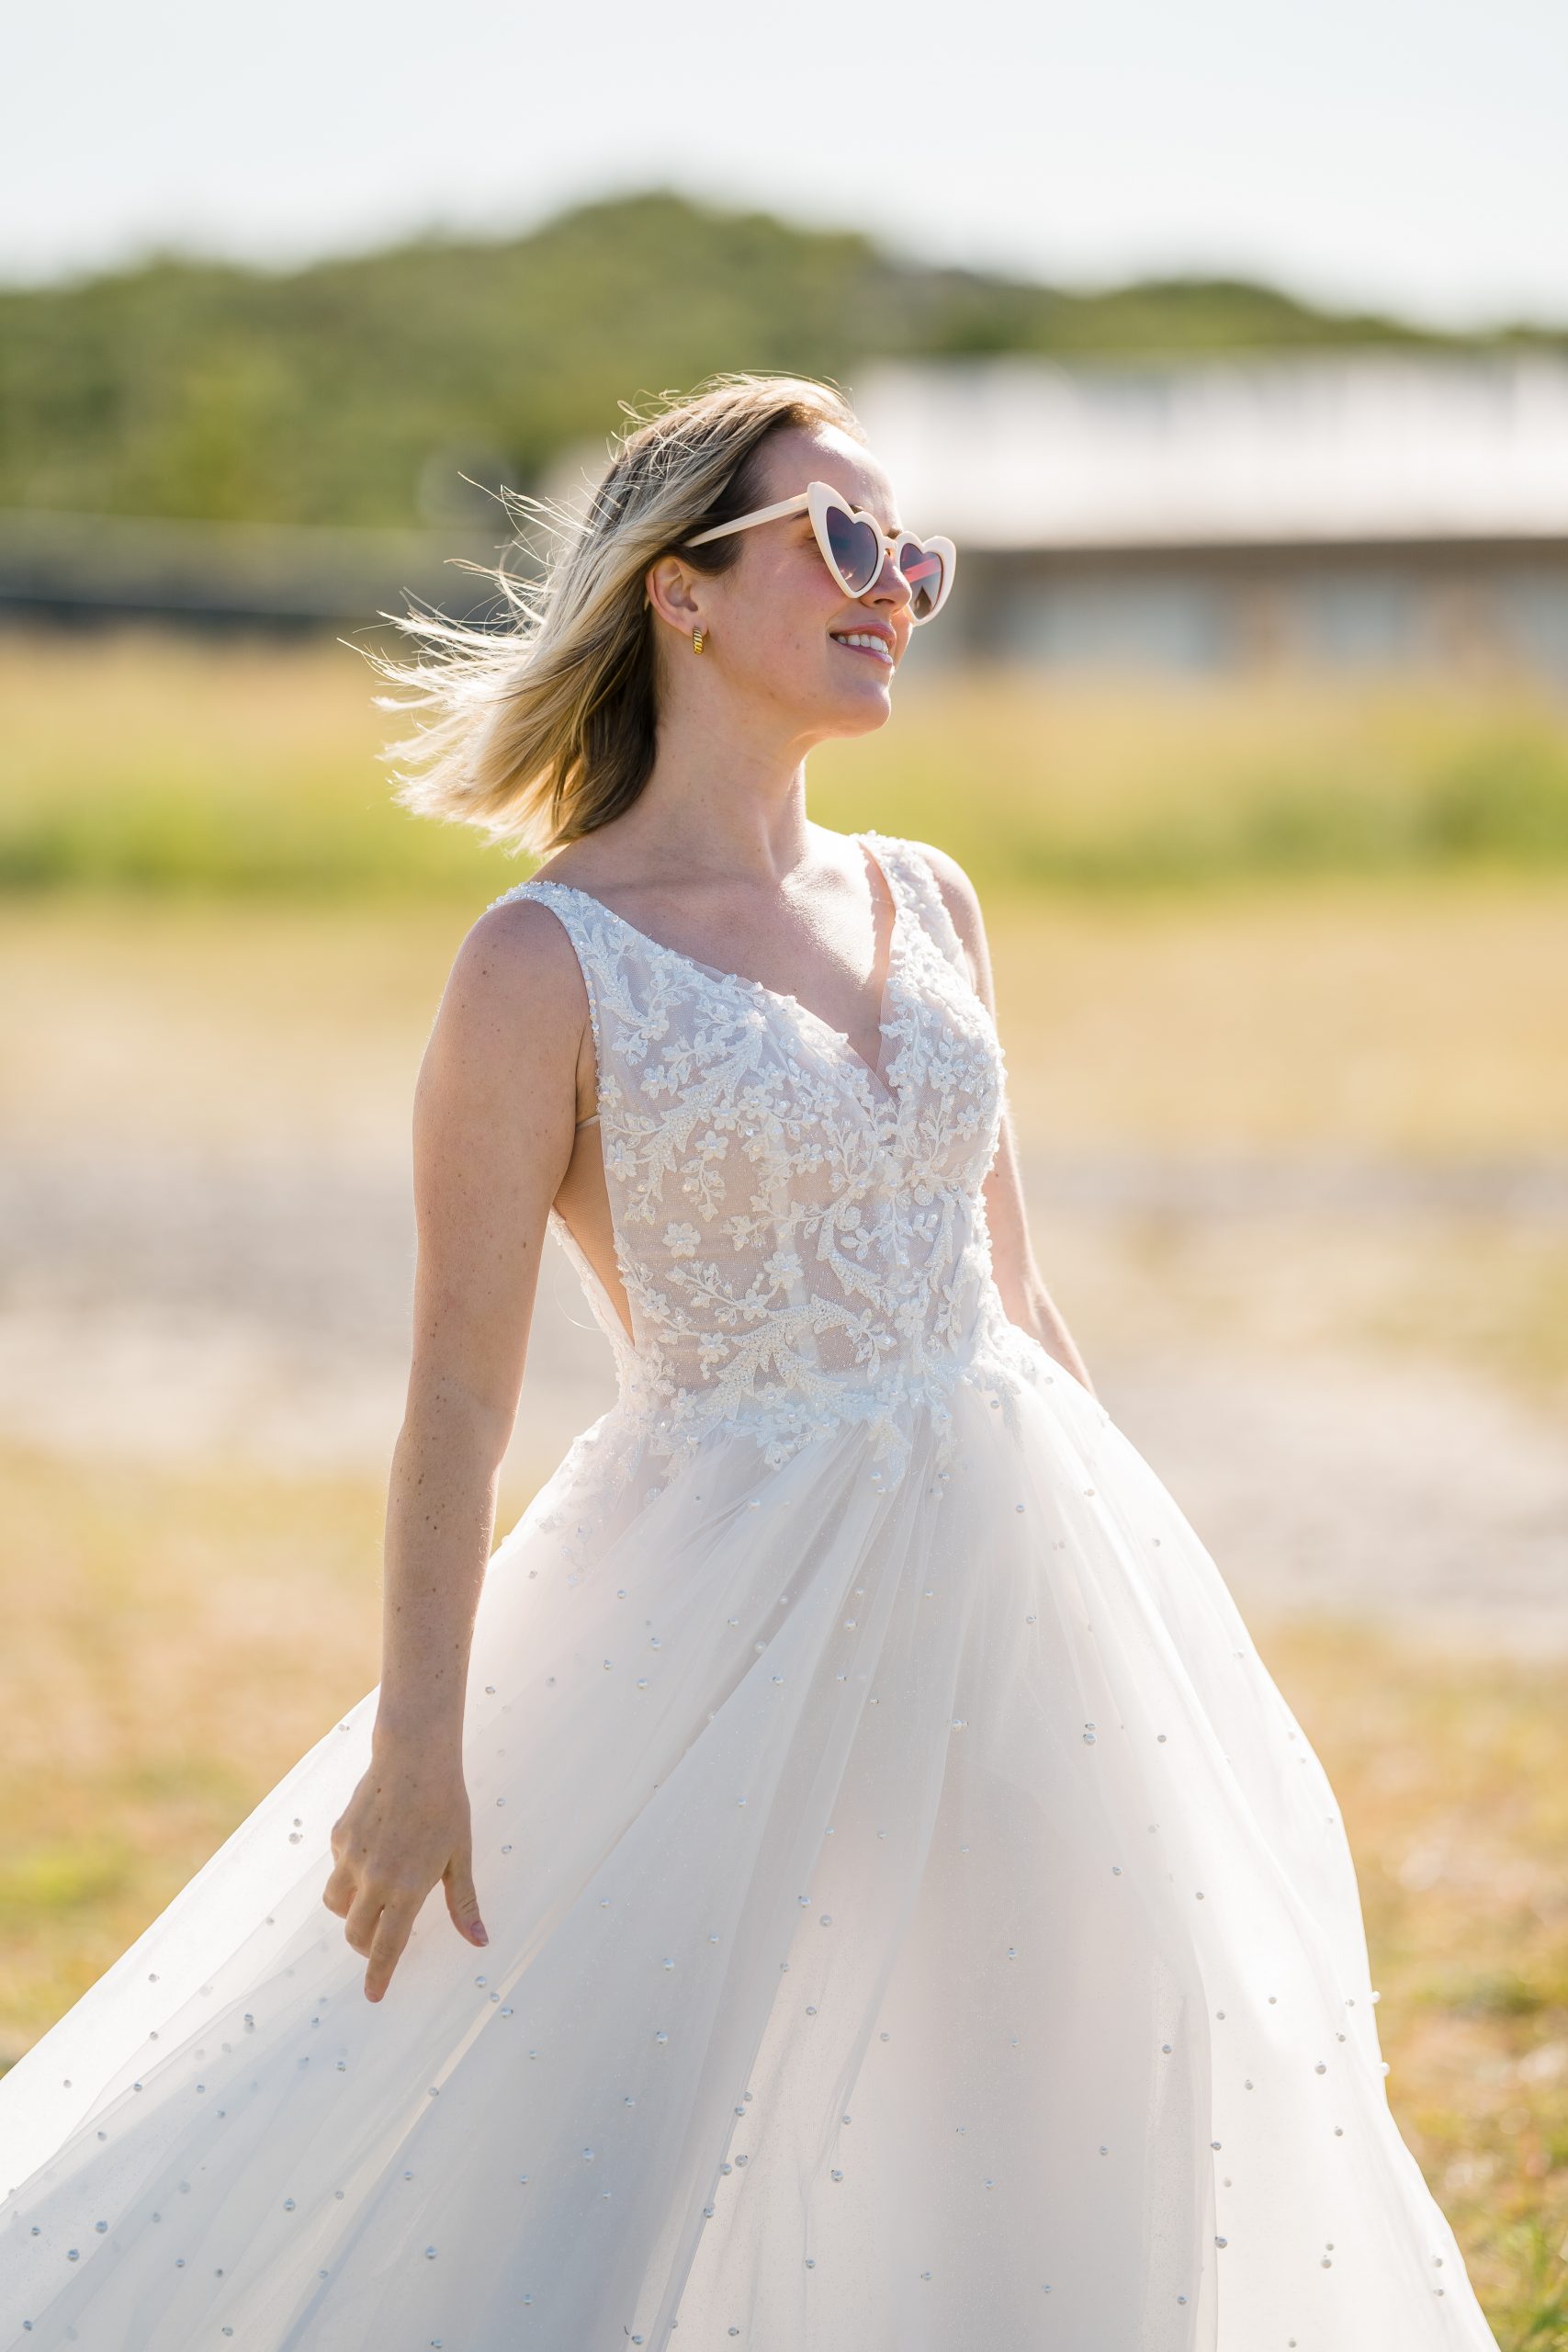  Bride Wearing Pearl Sheer A-line Wedding Dress Called Pierce by Sottero and Midgley